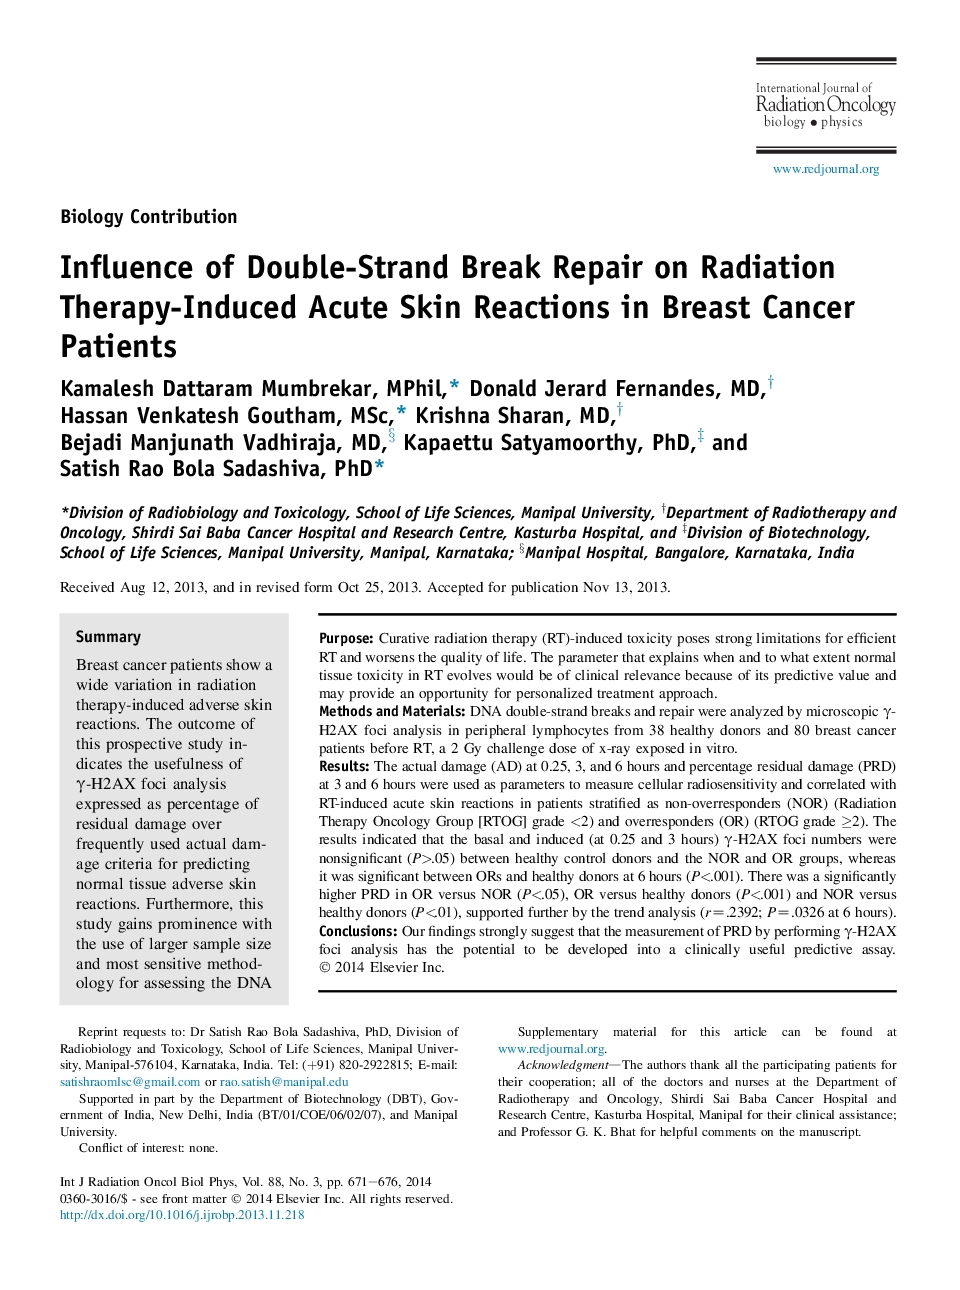 Influence of Double-Strand Break Repair on Radiation Therapy-Induced Acute Skin Reactions in Breast Cancer Patients